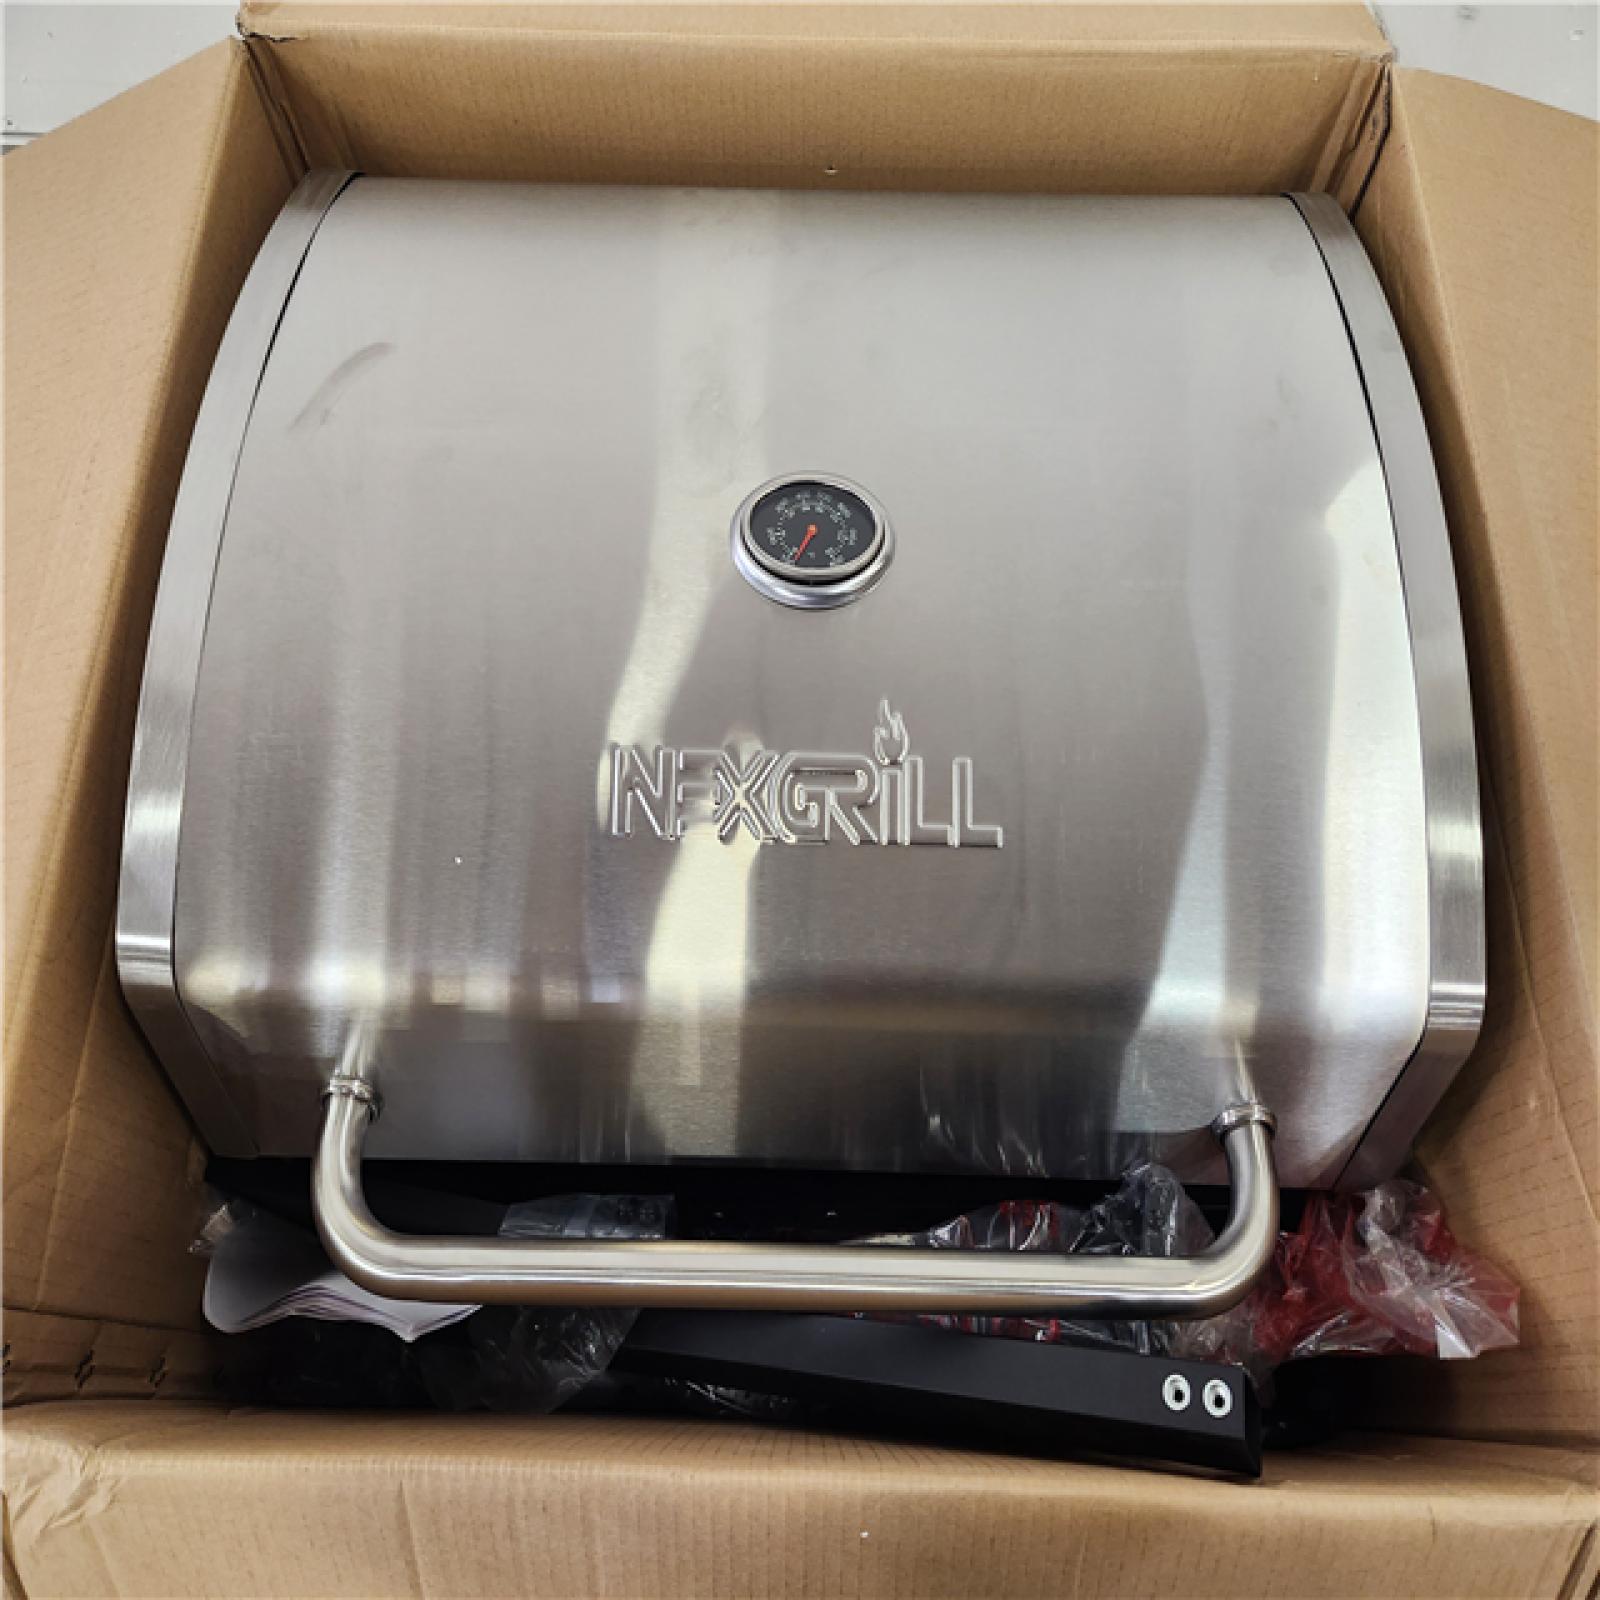 Phoenix Location NEW Nexgrill 5-Burner Propane Gas Grill in Stainless Steel with Side Burner and Condiment Rack